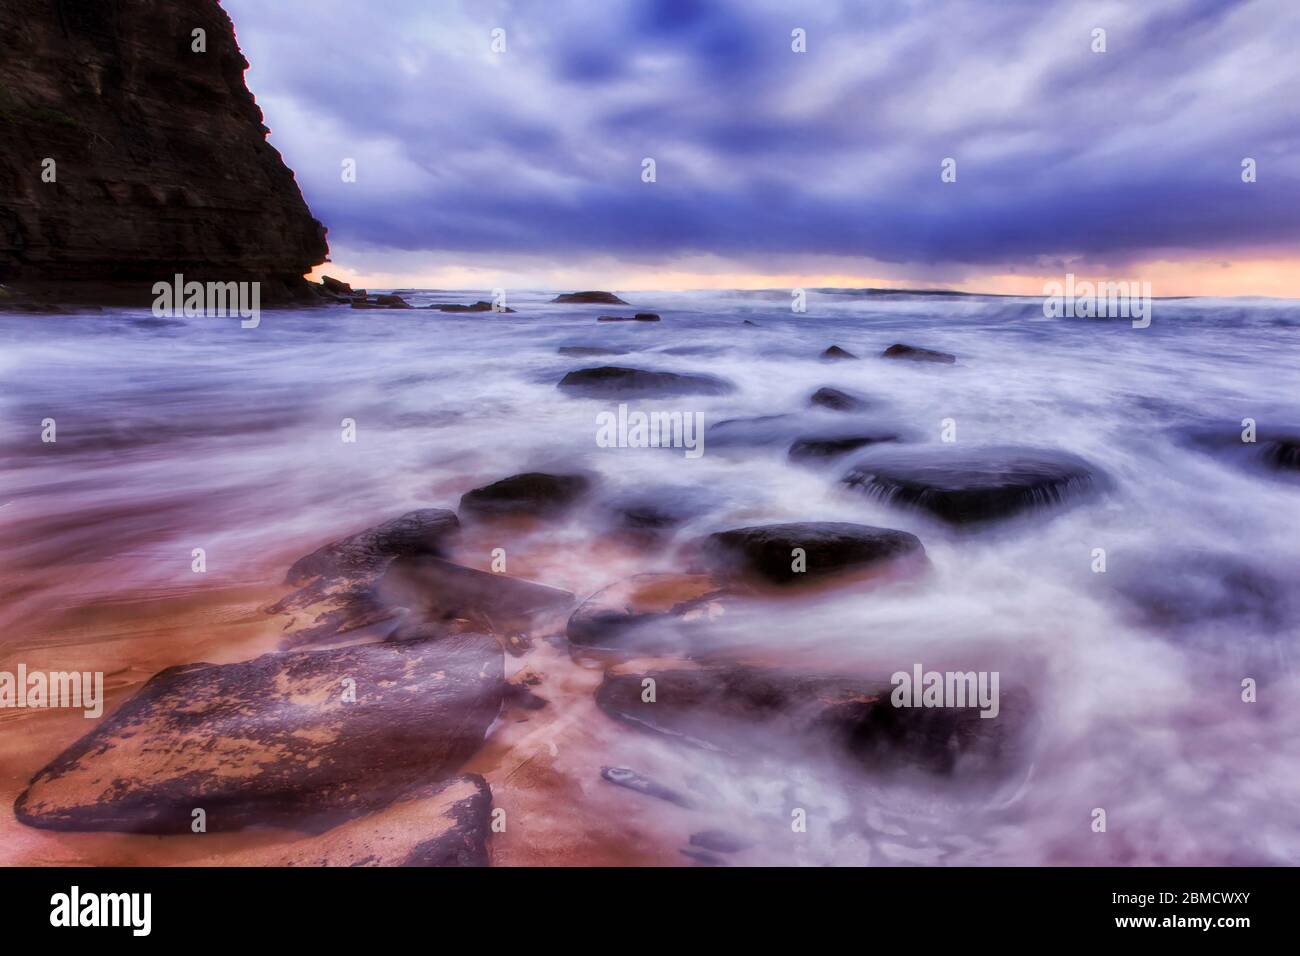 ROcks on sandy beach of Sydney Northern beaches near tall headland cliff at sunrise during stormy weather. Stock Photo